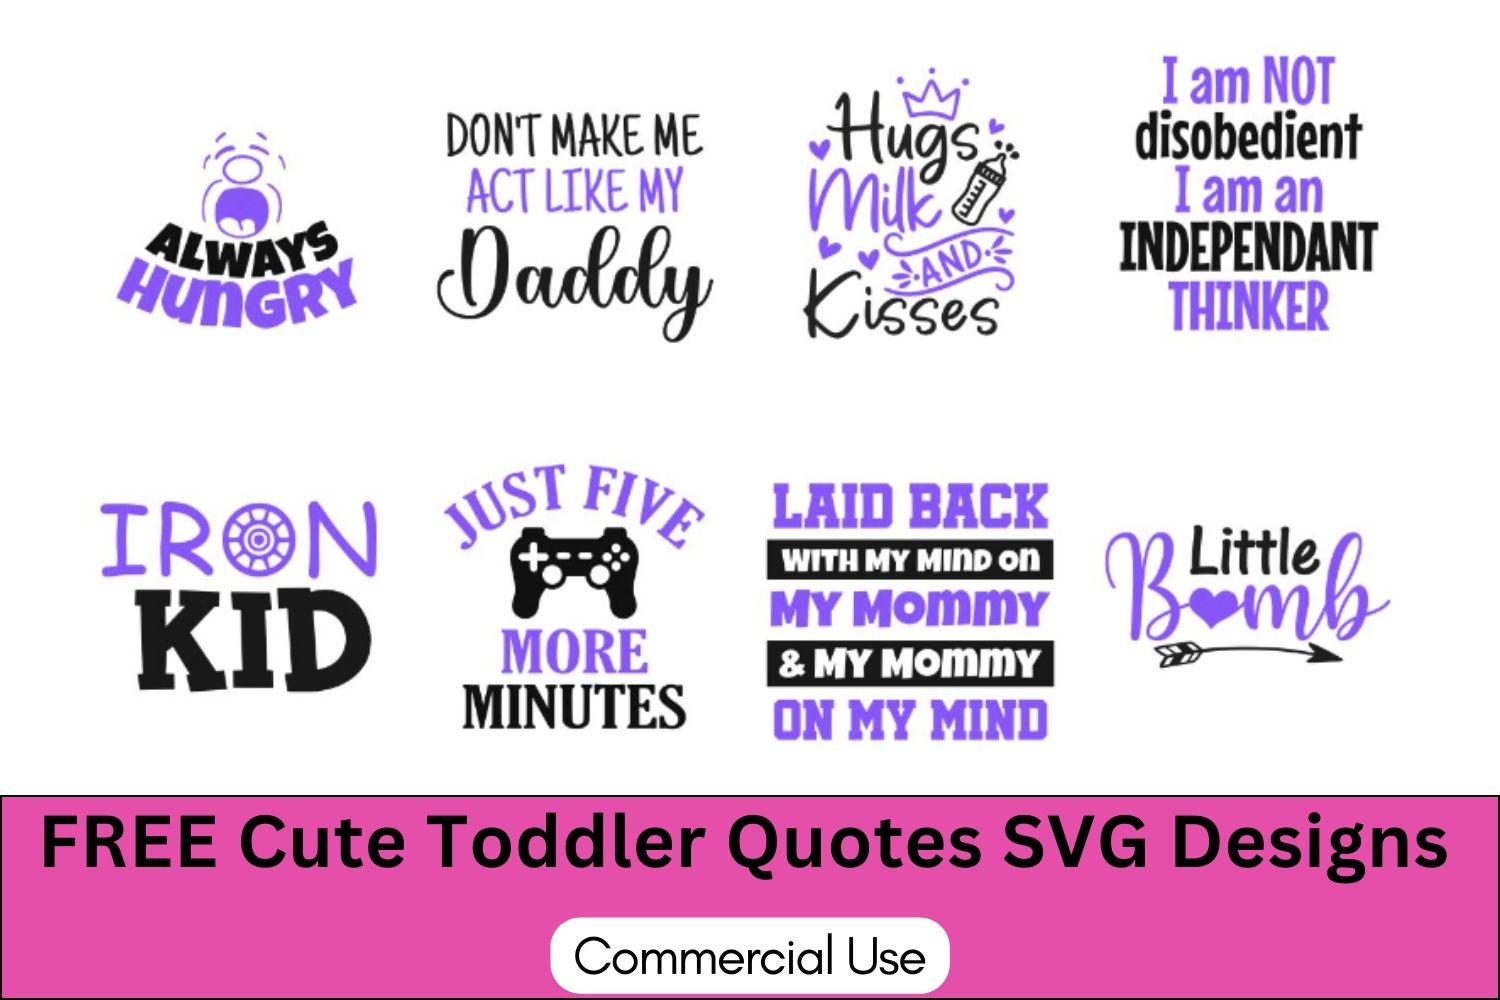 toddler sayings svgs, baby quotes & sayings, kids sayings, quotes, cricut,  download,  svg, clipart, designs, baby, free, funny cool kids